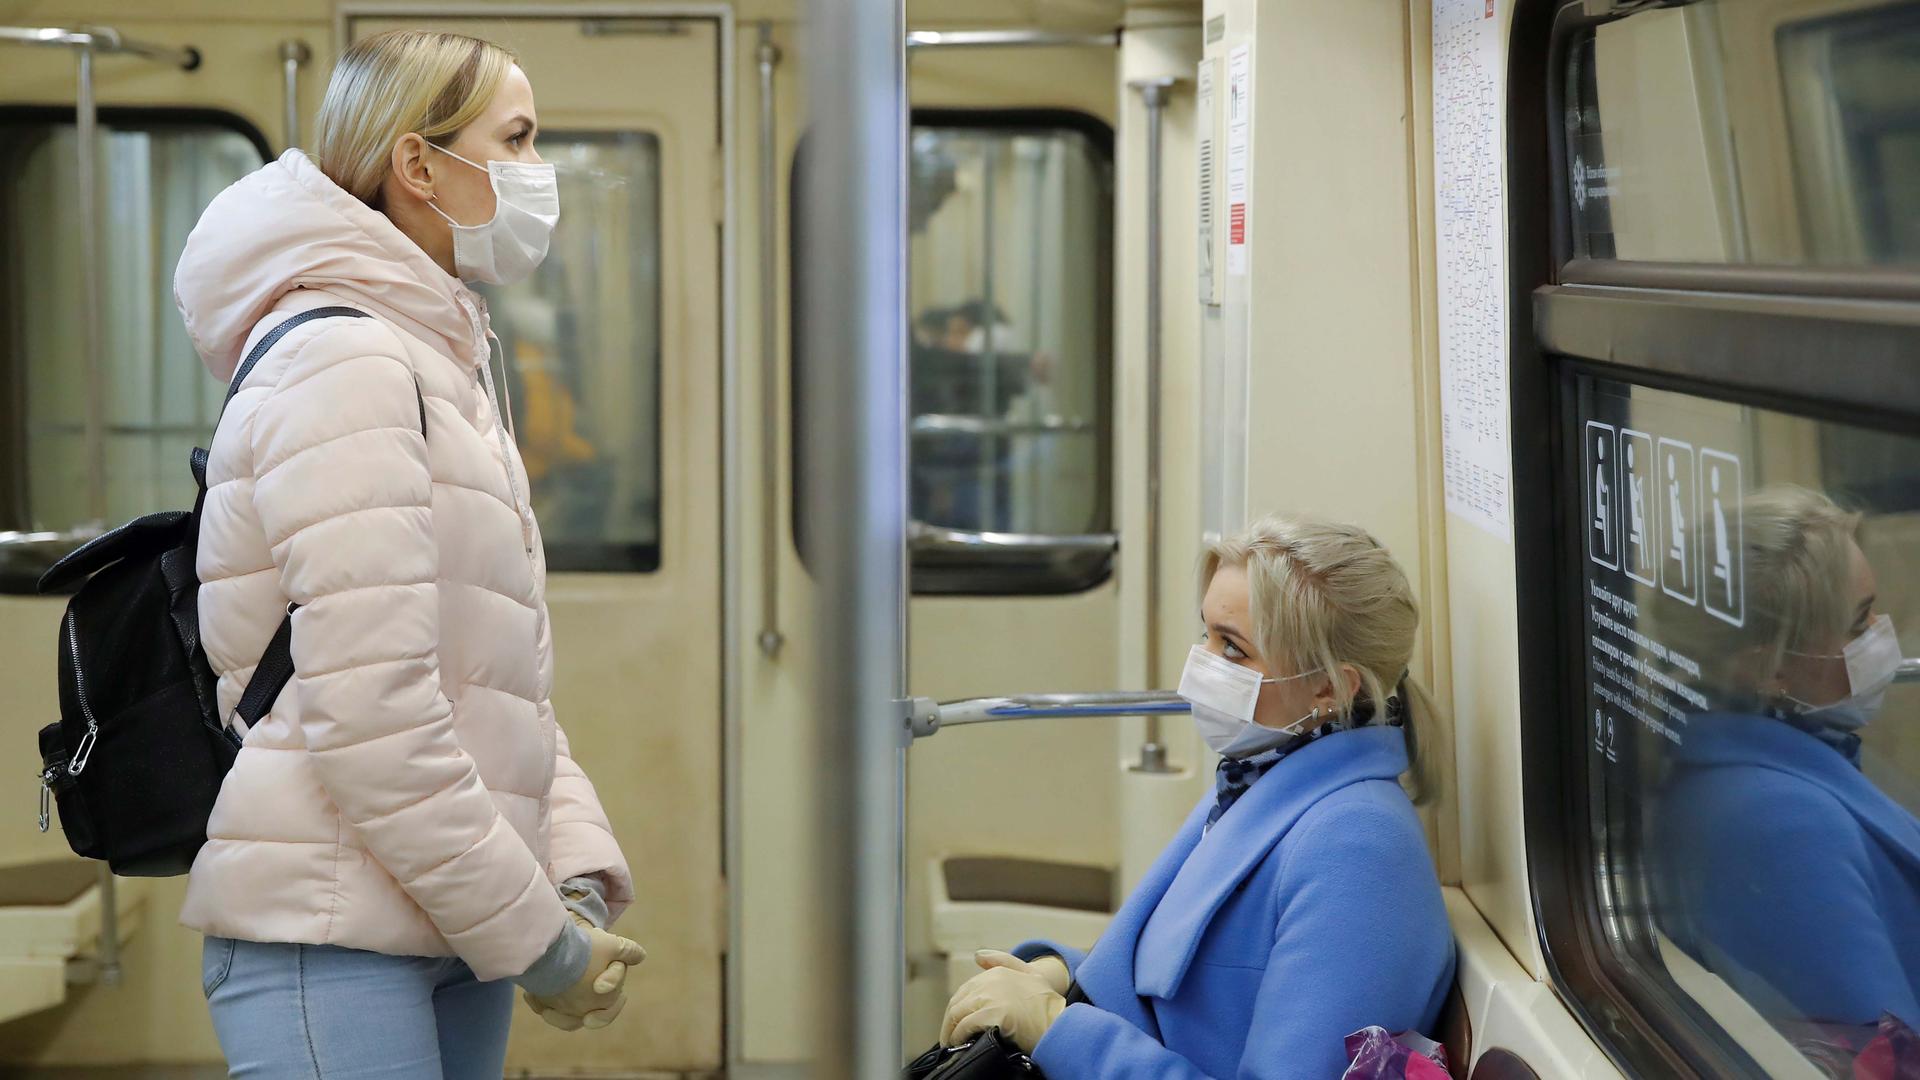 Women wearing protective masks travel in a metro train during a partial lockdown imposed to prevent the spread of coronavirus disease (COVID-19) in Moscow, Russia, on April 2, 2020.